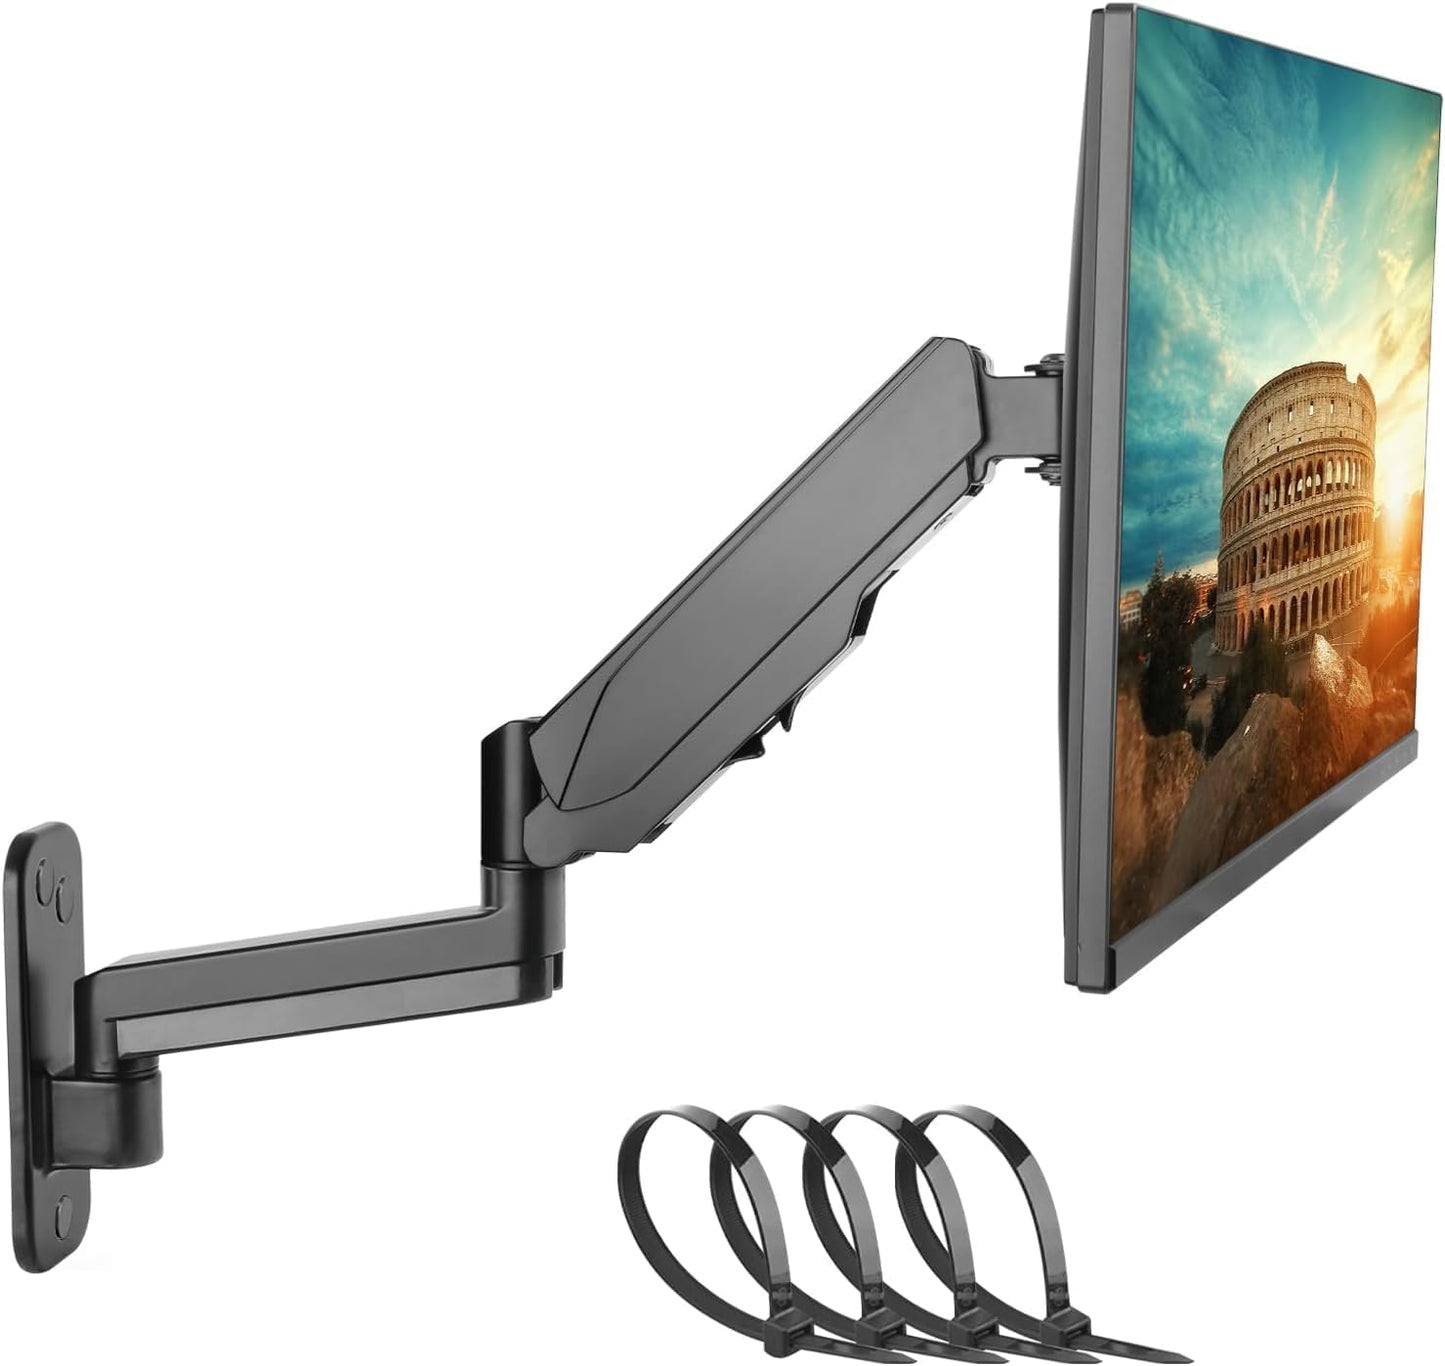 Monitor Arm Wall Mount Bracket for 17-32 inch Monitor & Small TV, Height Adjustable Gas Spring Single Wall Monitor Arm, Tilt Swivel Rotate, Load Weight 2.2 to 19.8lbs, Next day delivery